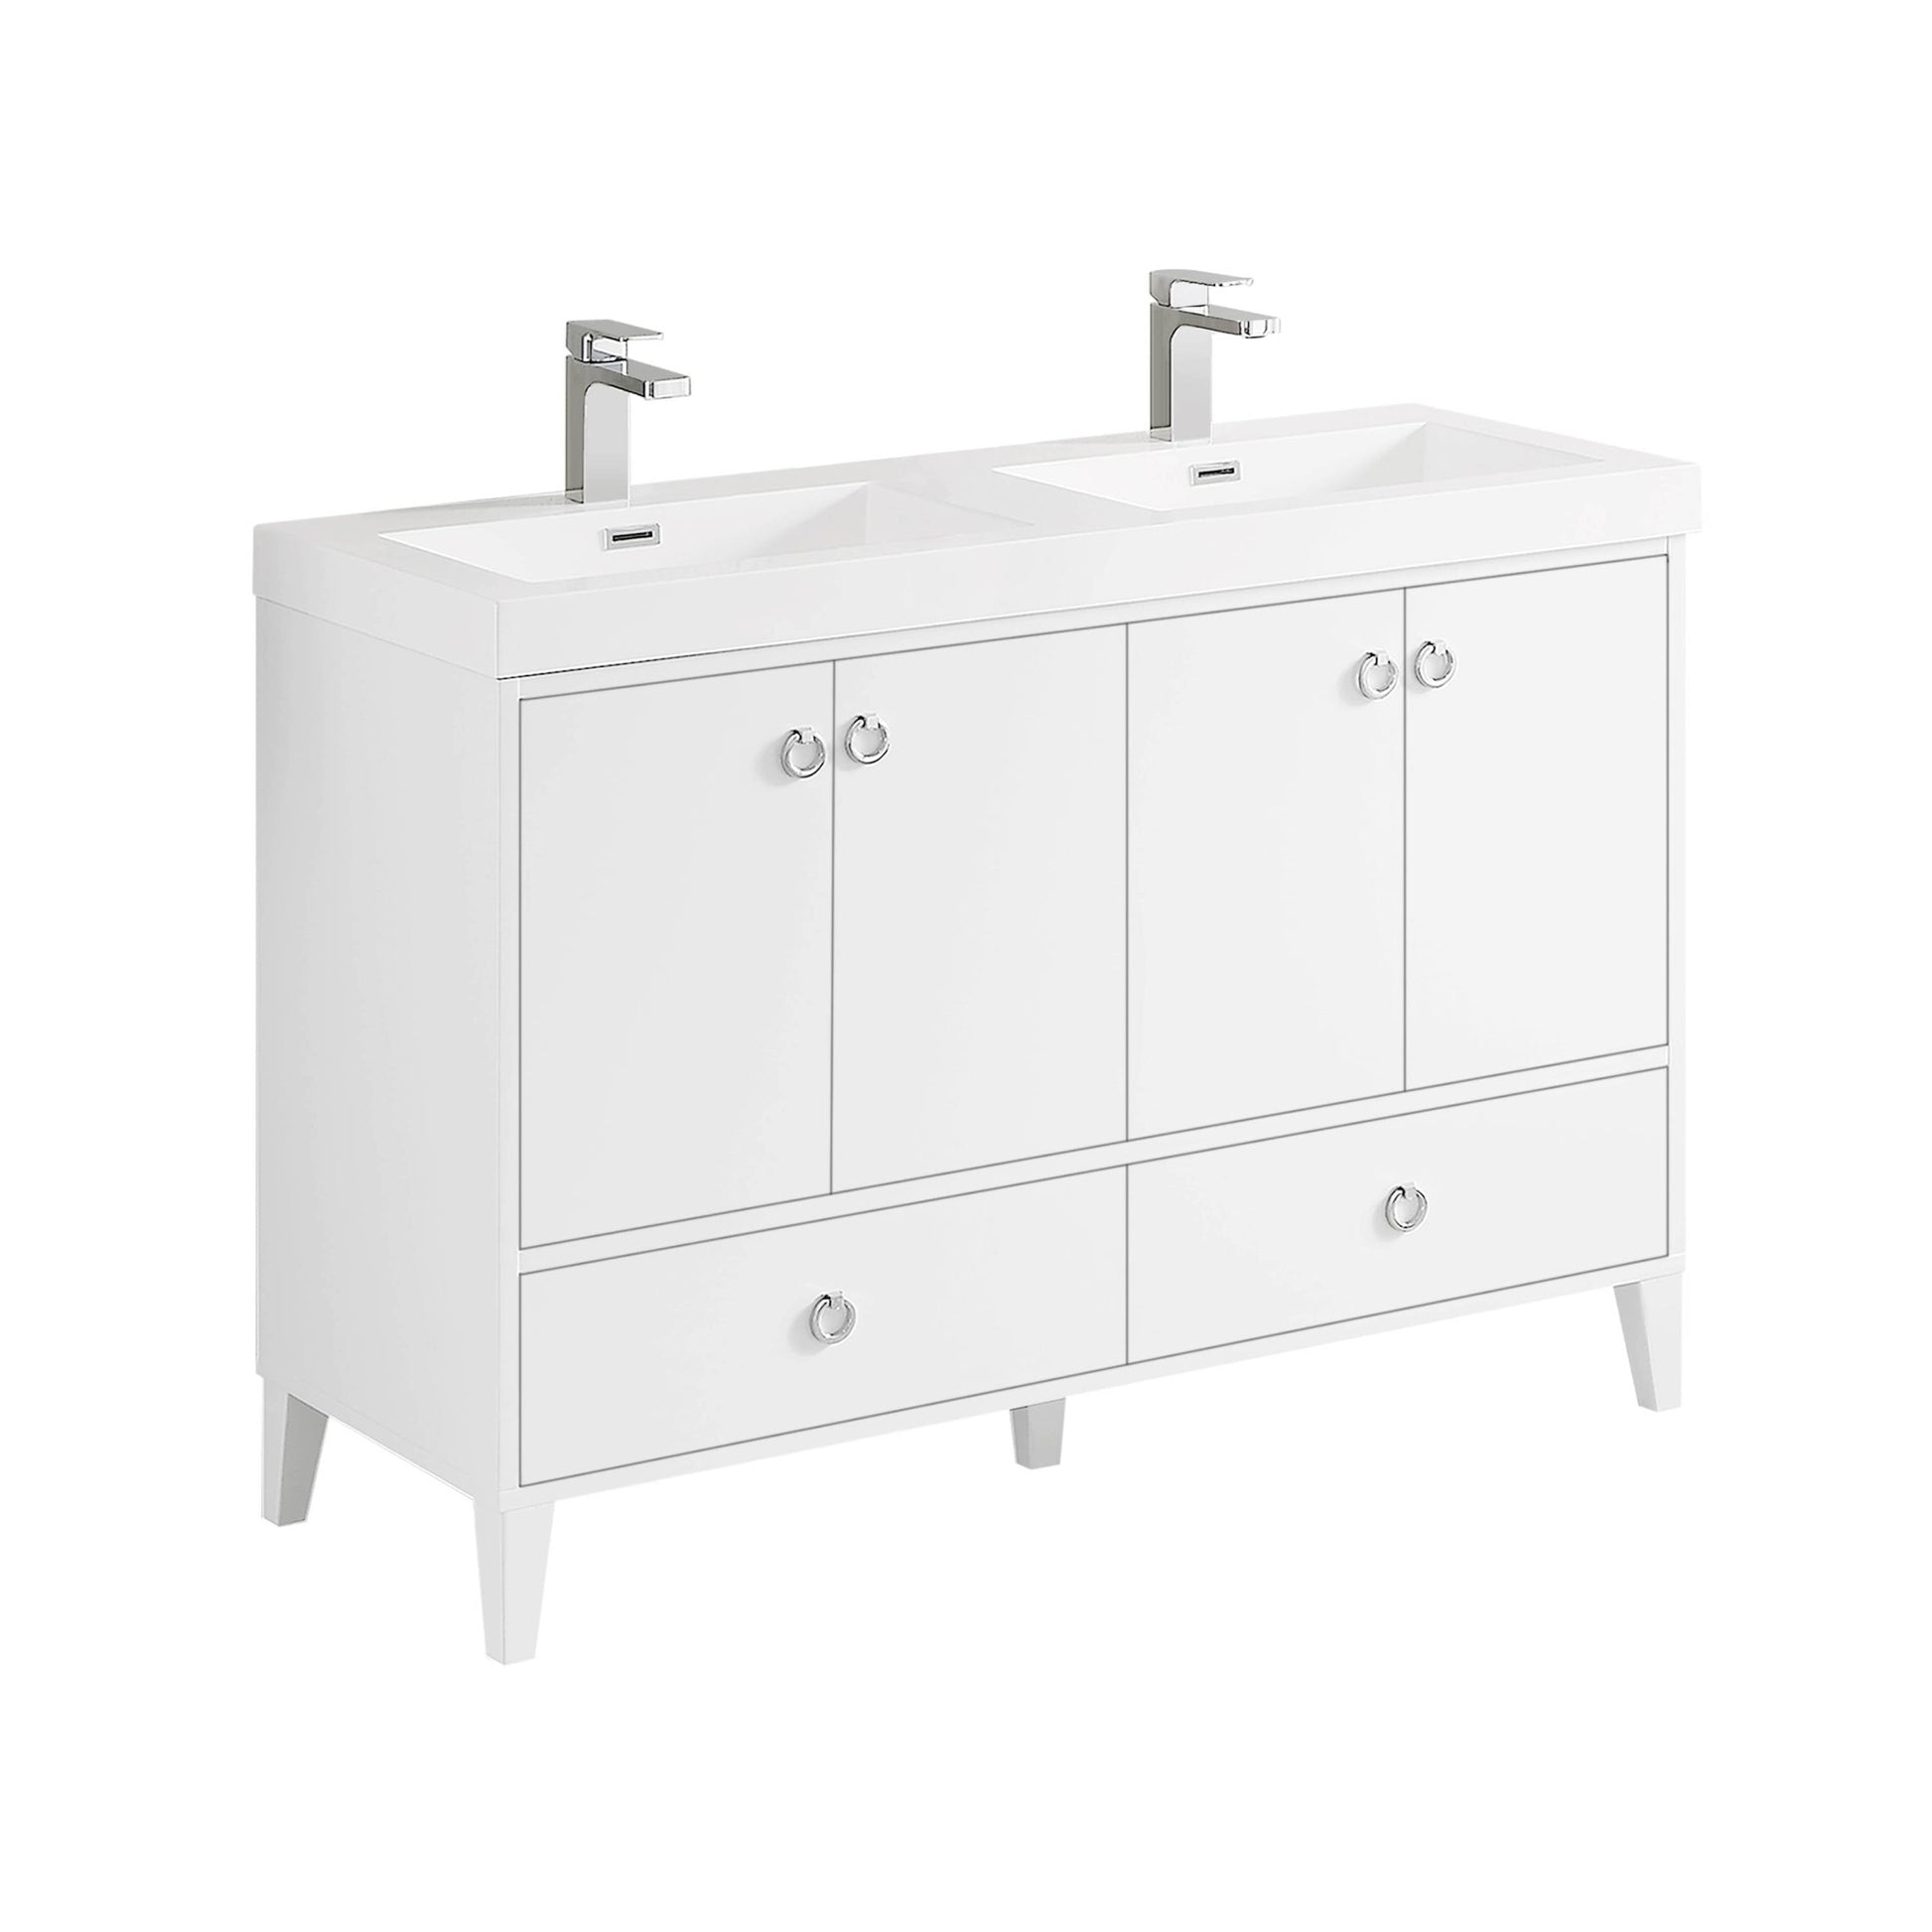 Blossom Lyon 48" 4-Door 2-Drawer Matte White Freestanding Vanity Set With Acrylic Top and Integrated Double Sinks